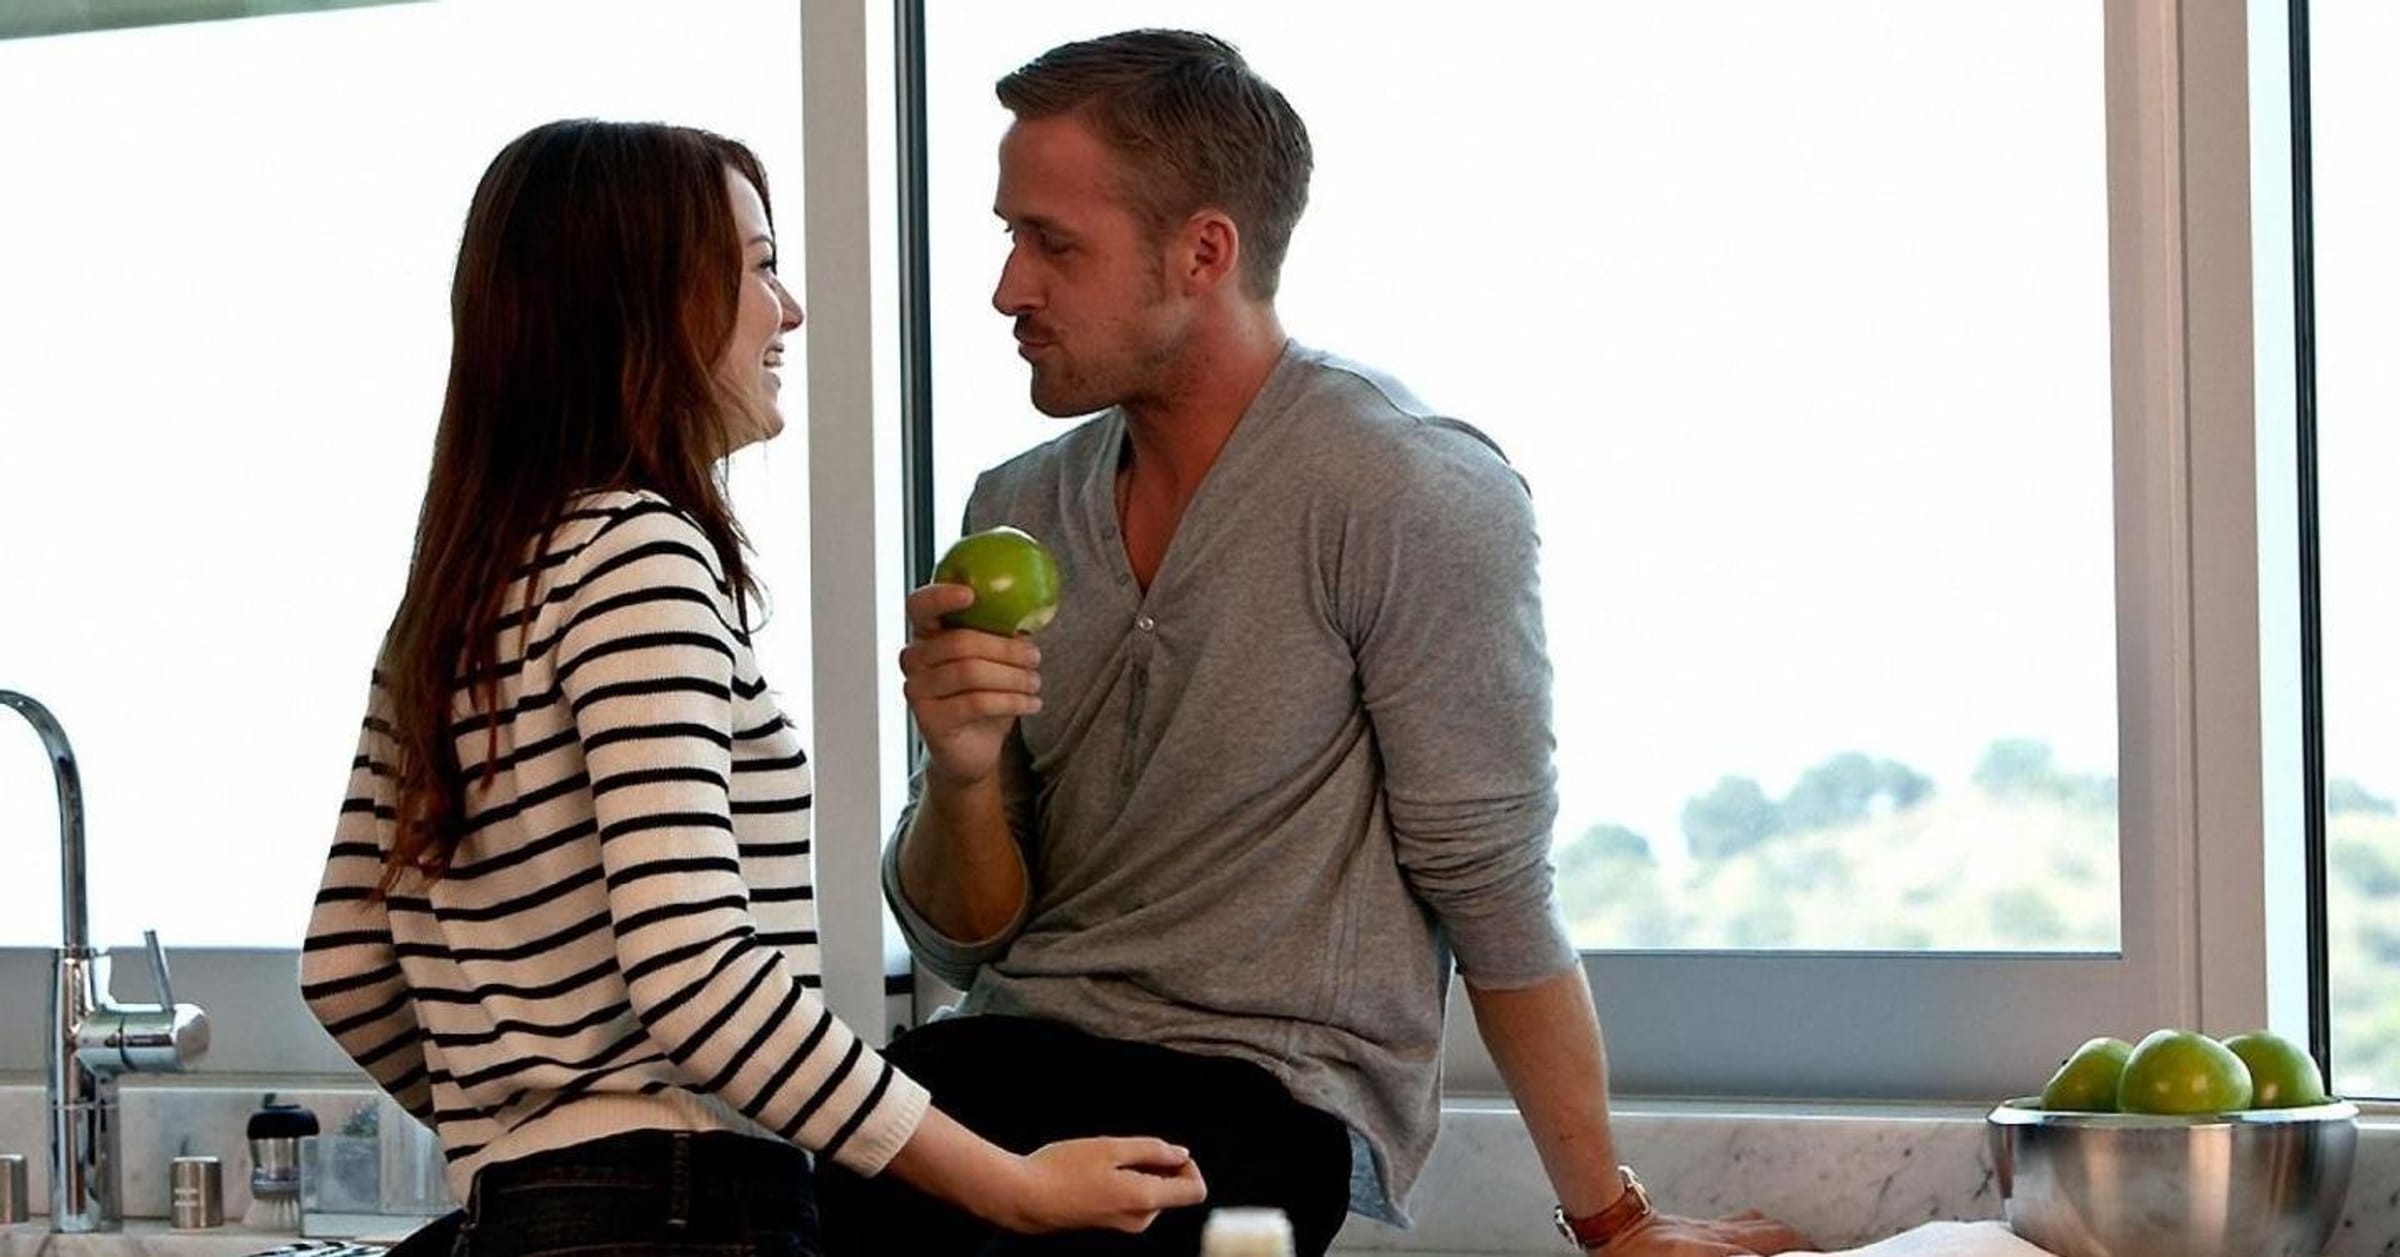 DVD review: 'Crazy Stupid Love